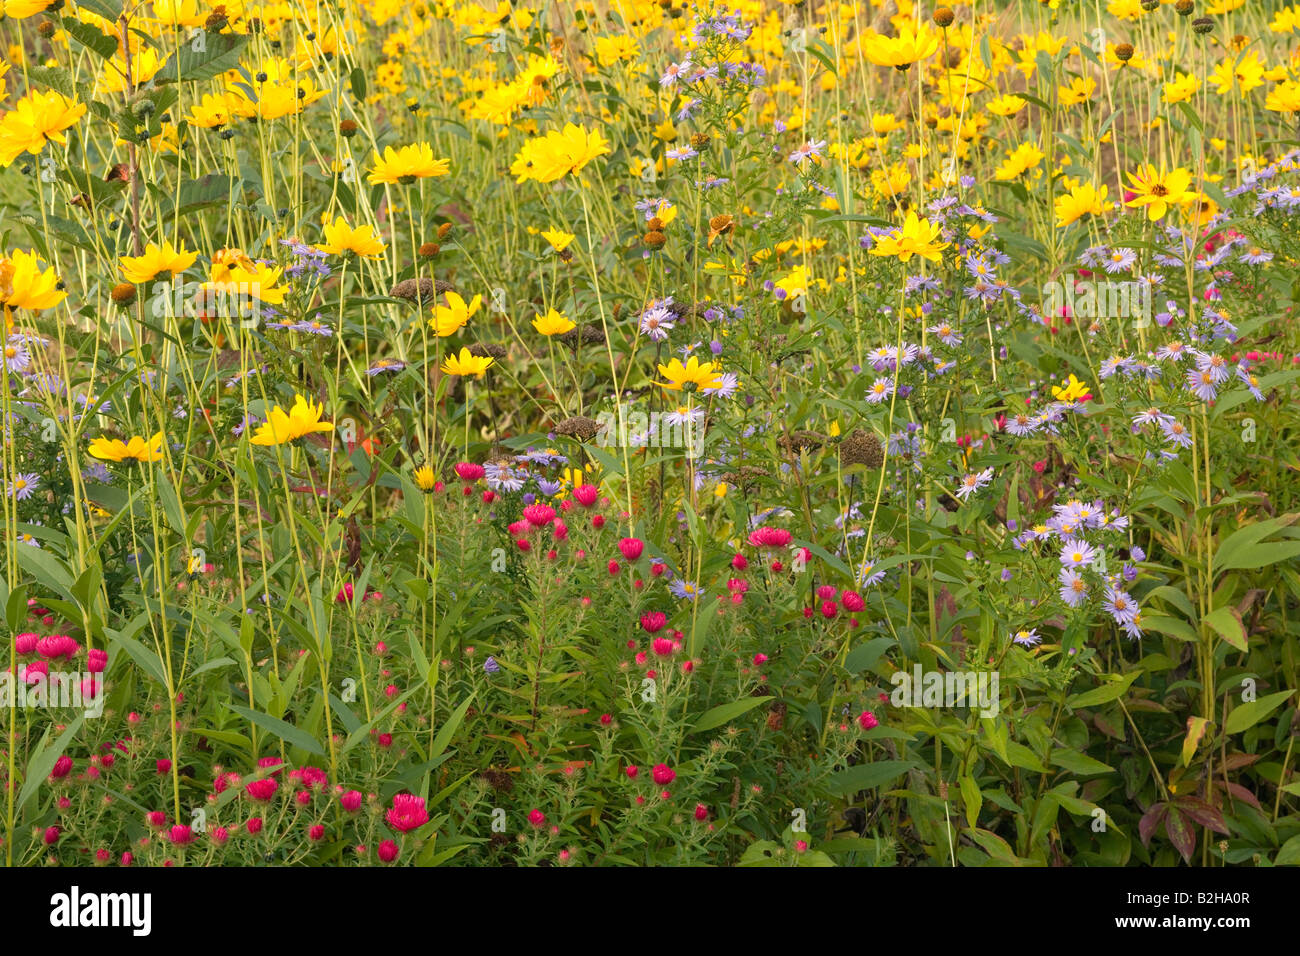 autumn flowers colourful violet coloured New England Asters Aster novae angliae Coneflowers meadow Stock Photo